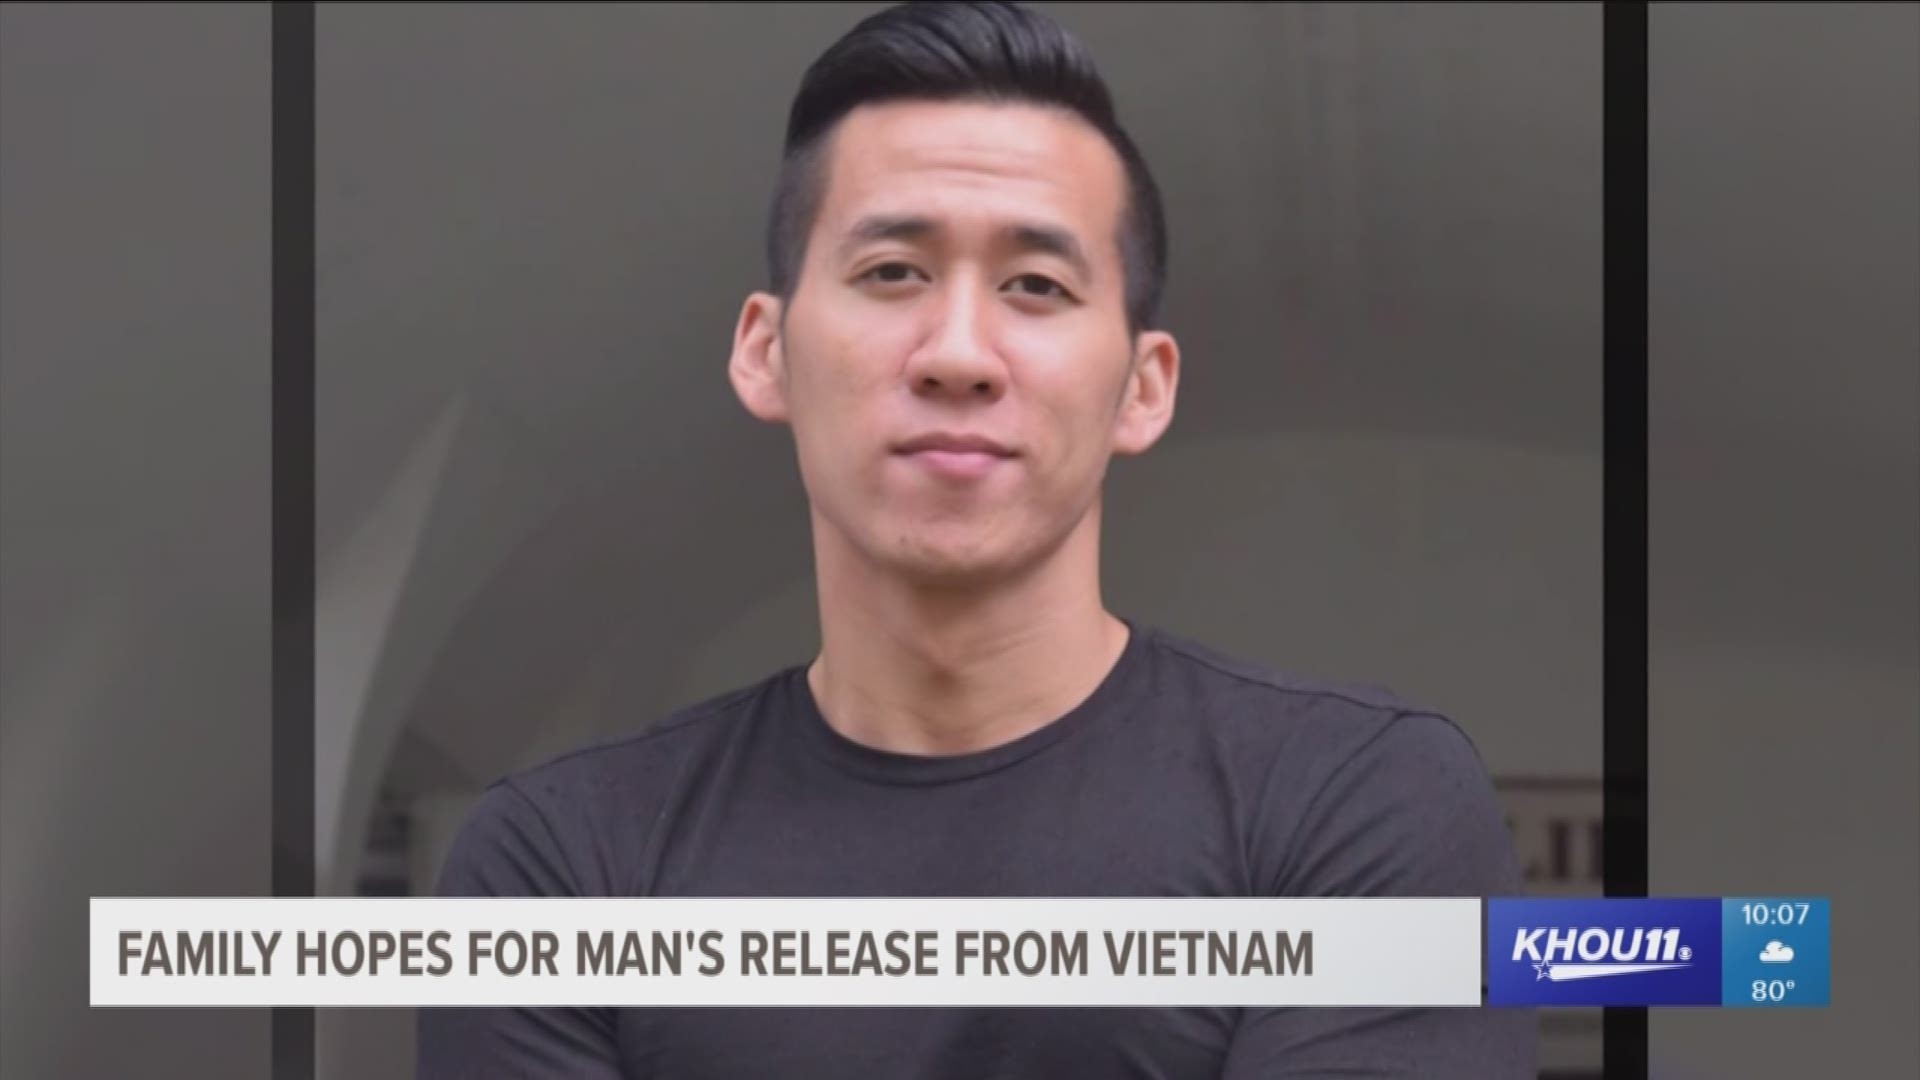 The family of a Houston man is hoping that a little help from the federal government can help get Will Nguyen home nearly a month after he was arrested during a government protest in Vietnam.